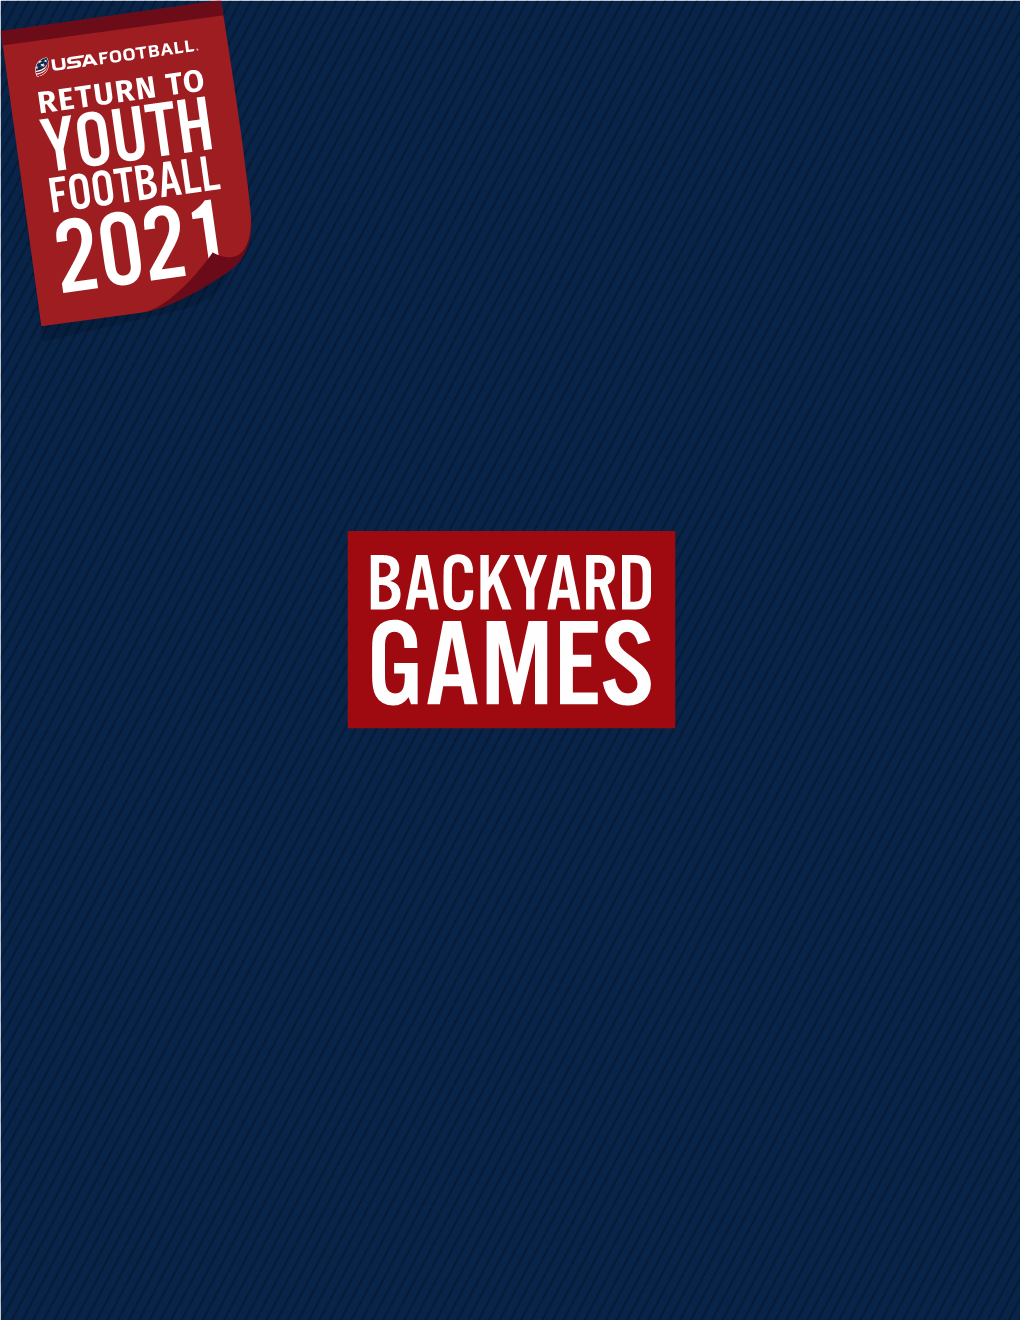 BACKYARD GAMES BACKYARD GAMES to RETUR N If You’Re Staying Home This Season, We Don’T Want You to Miss out on the Fun of Football